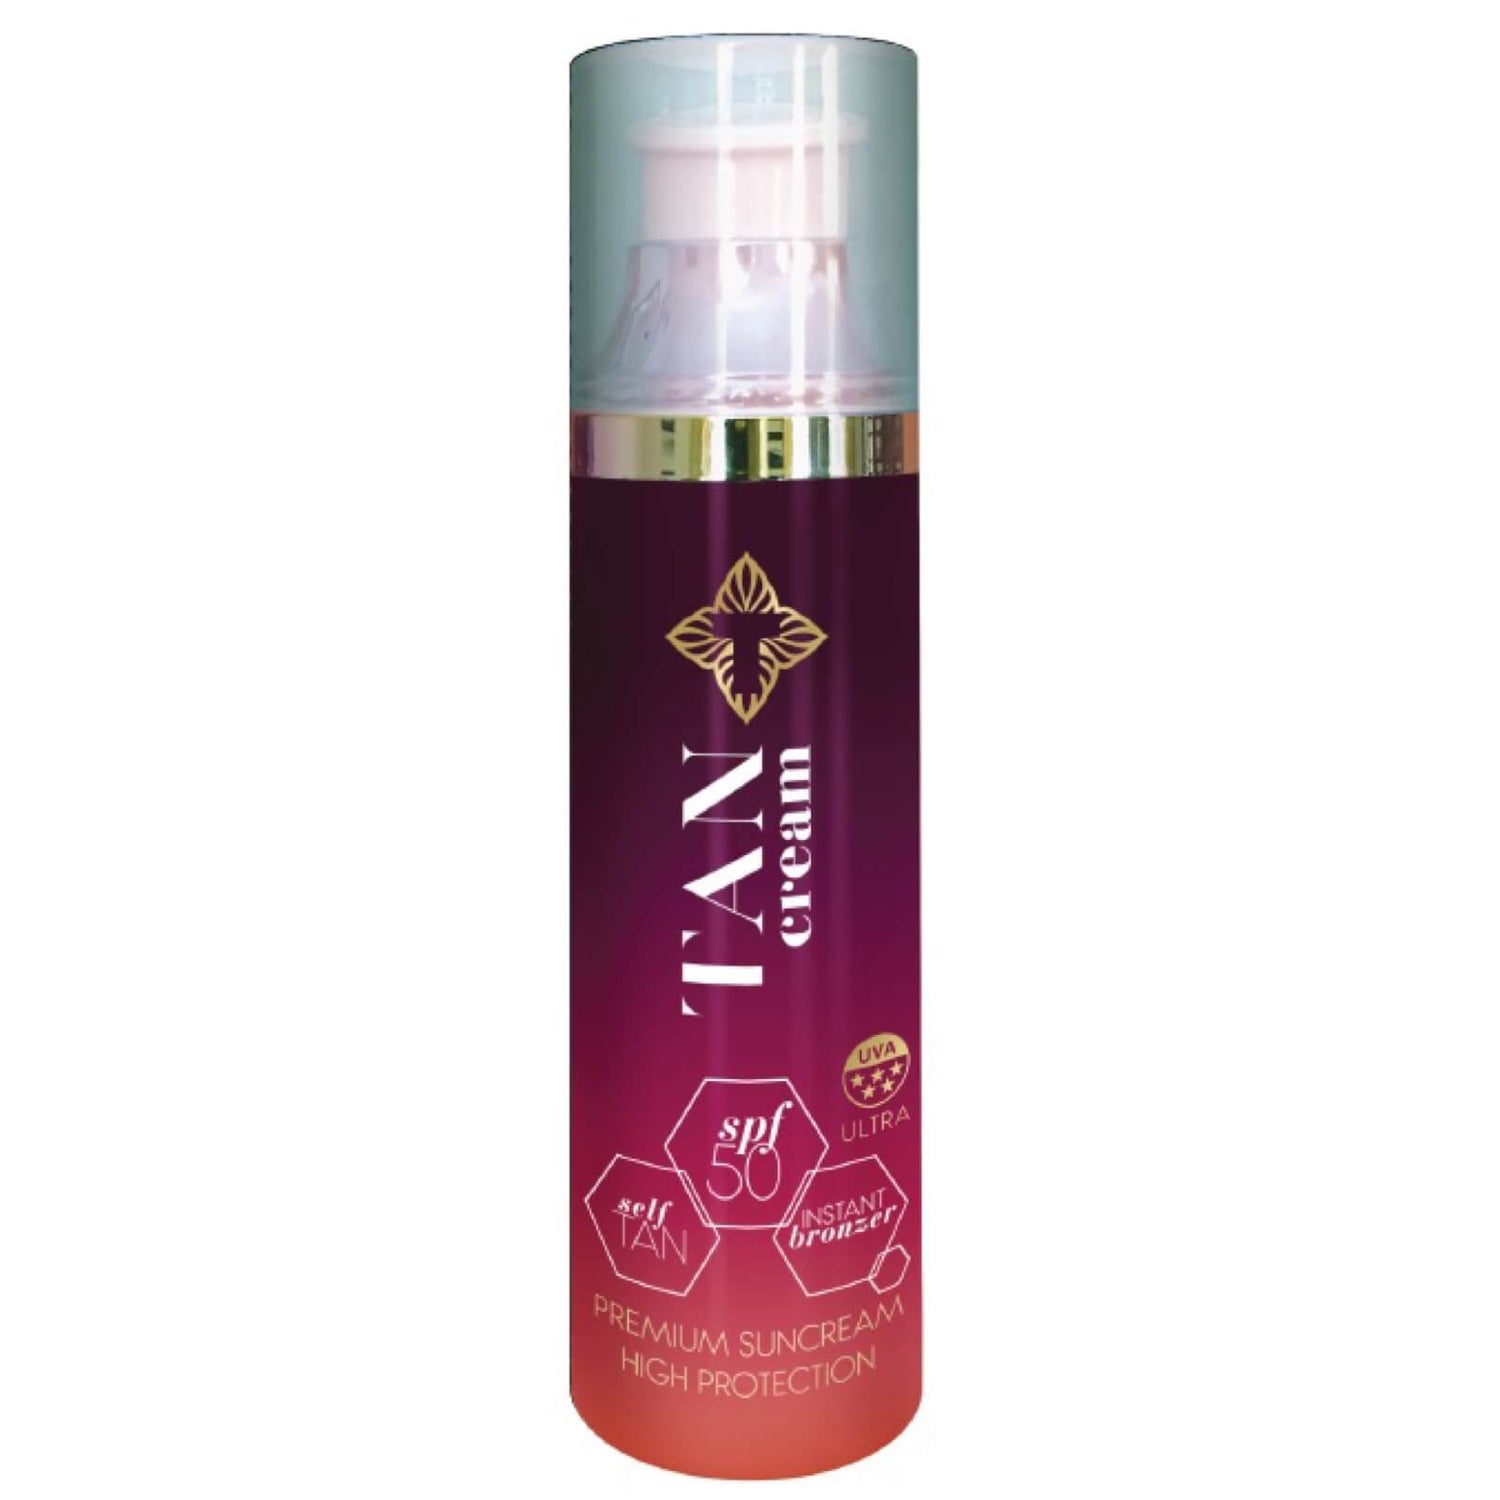 Tancream All-in-One Self Tan and Bronzer SPF50 100ml